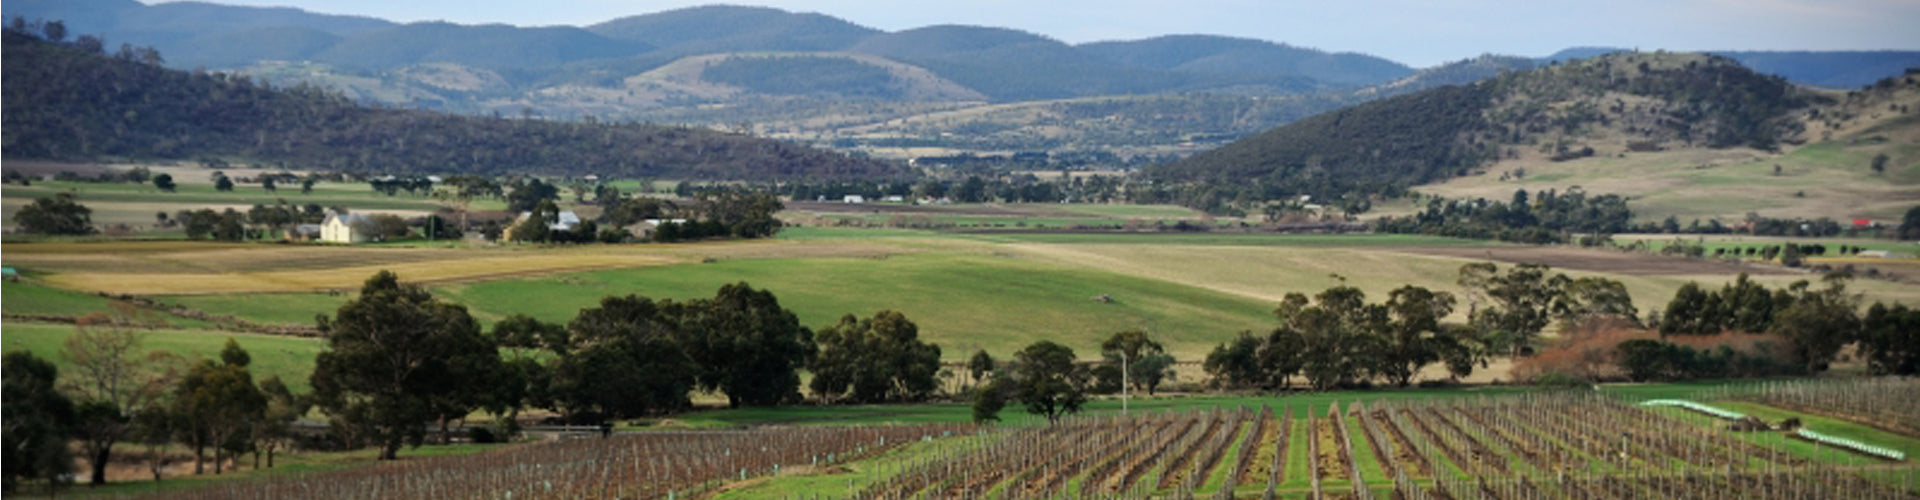 The Tolpuddle Vineyard in Tasmania's Coal River Valley